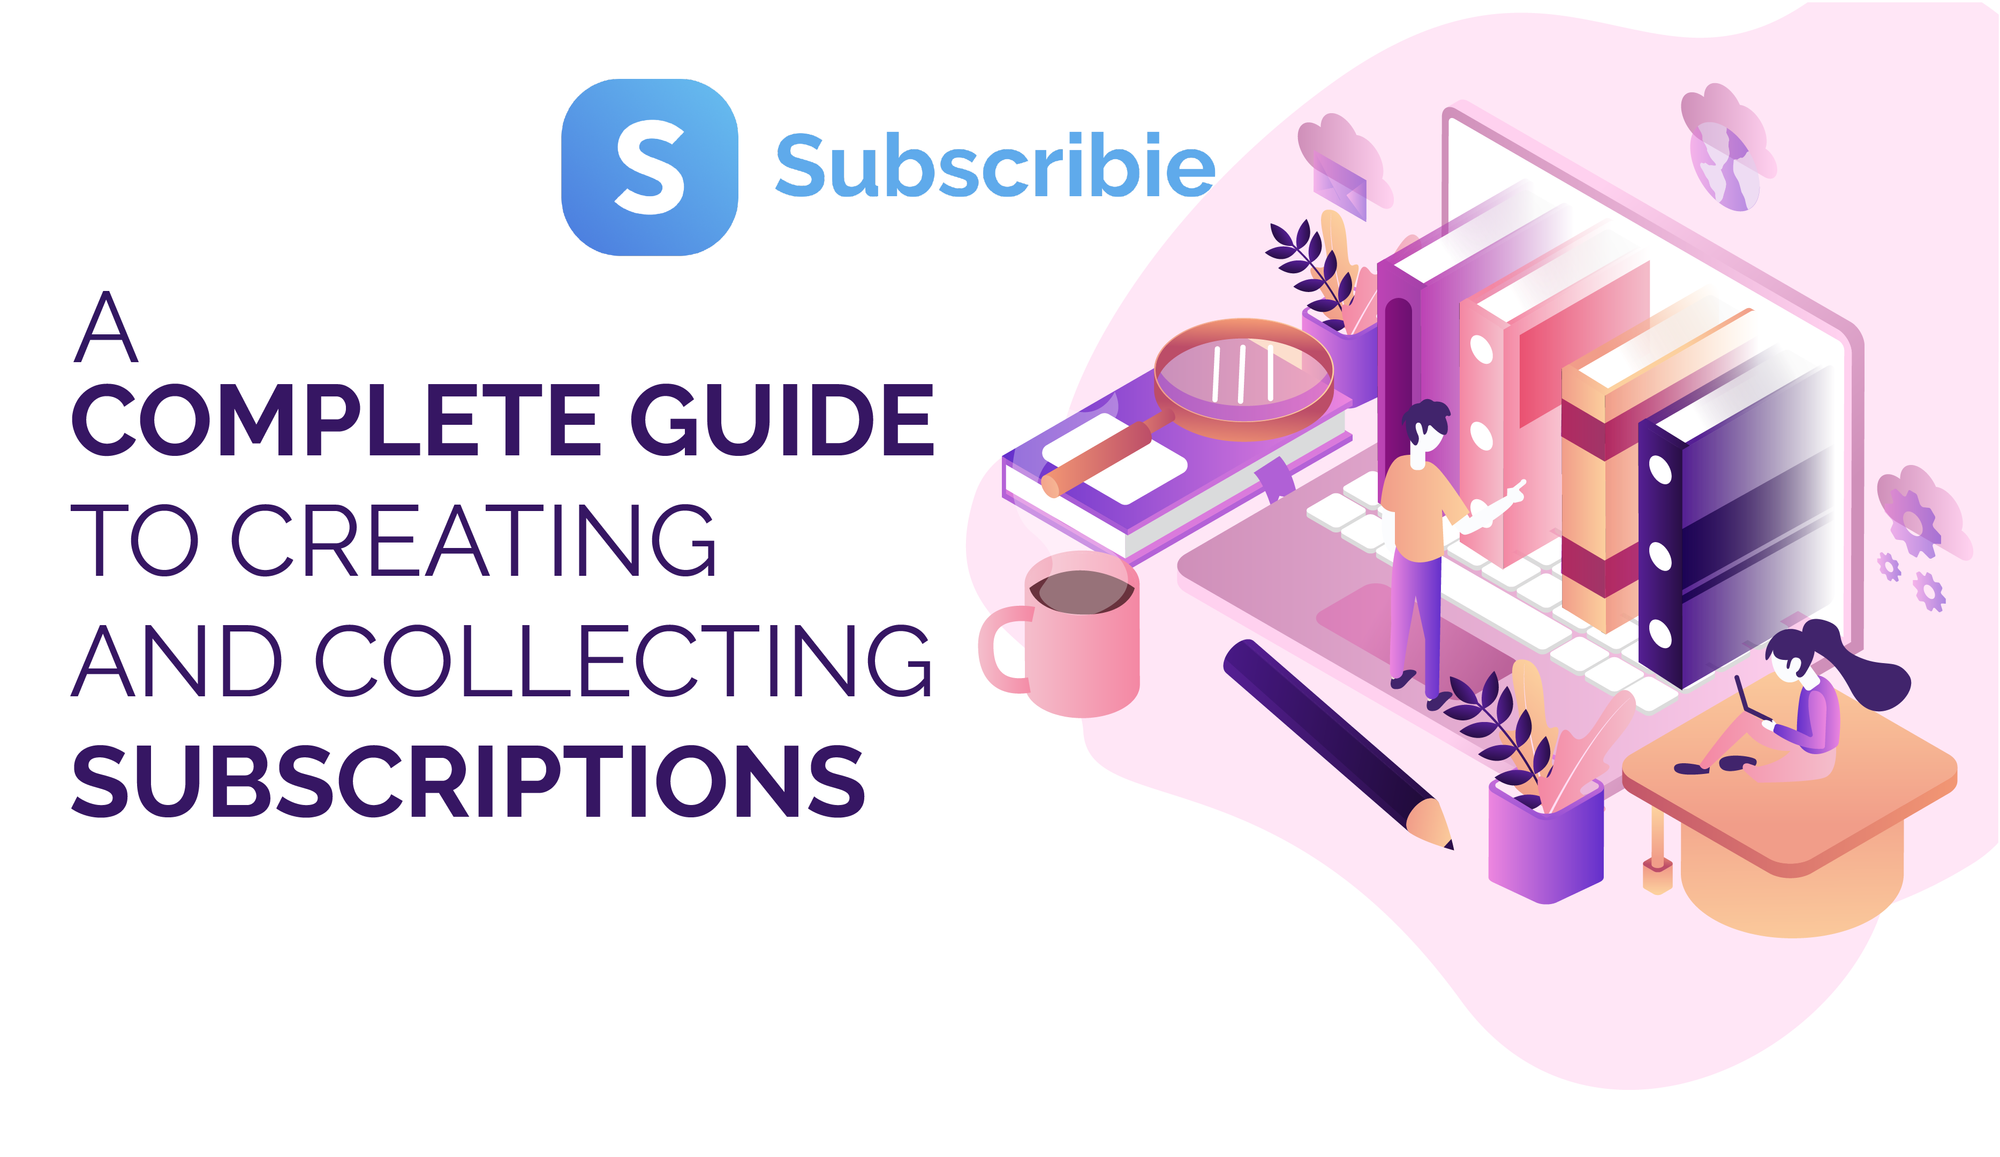 The Complete Guide to Creating and Collecting Subscriptions